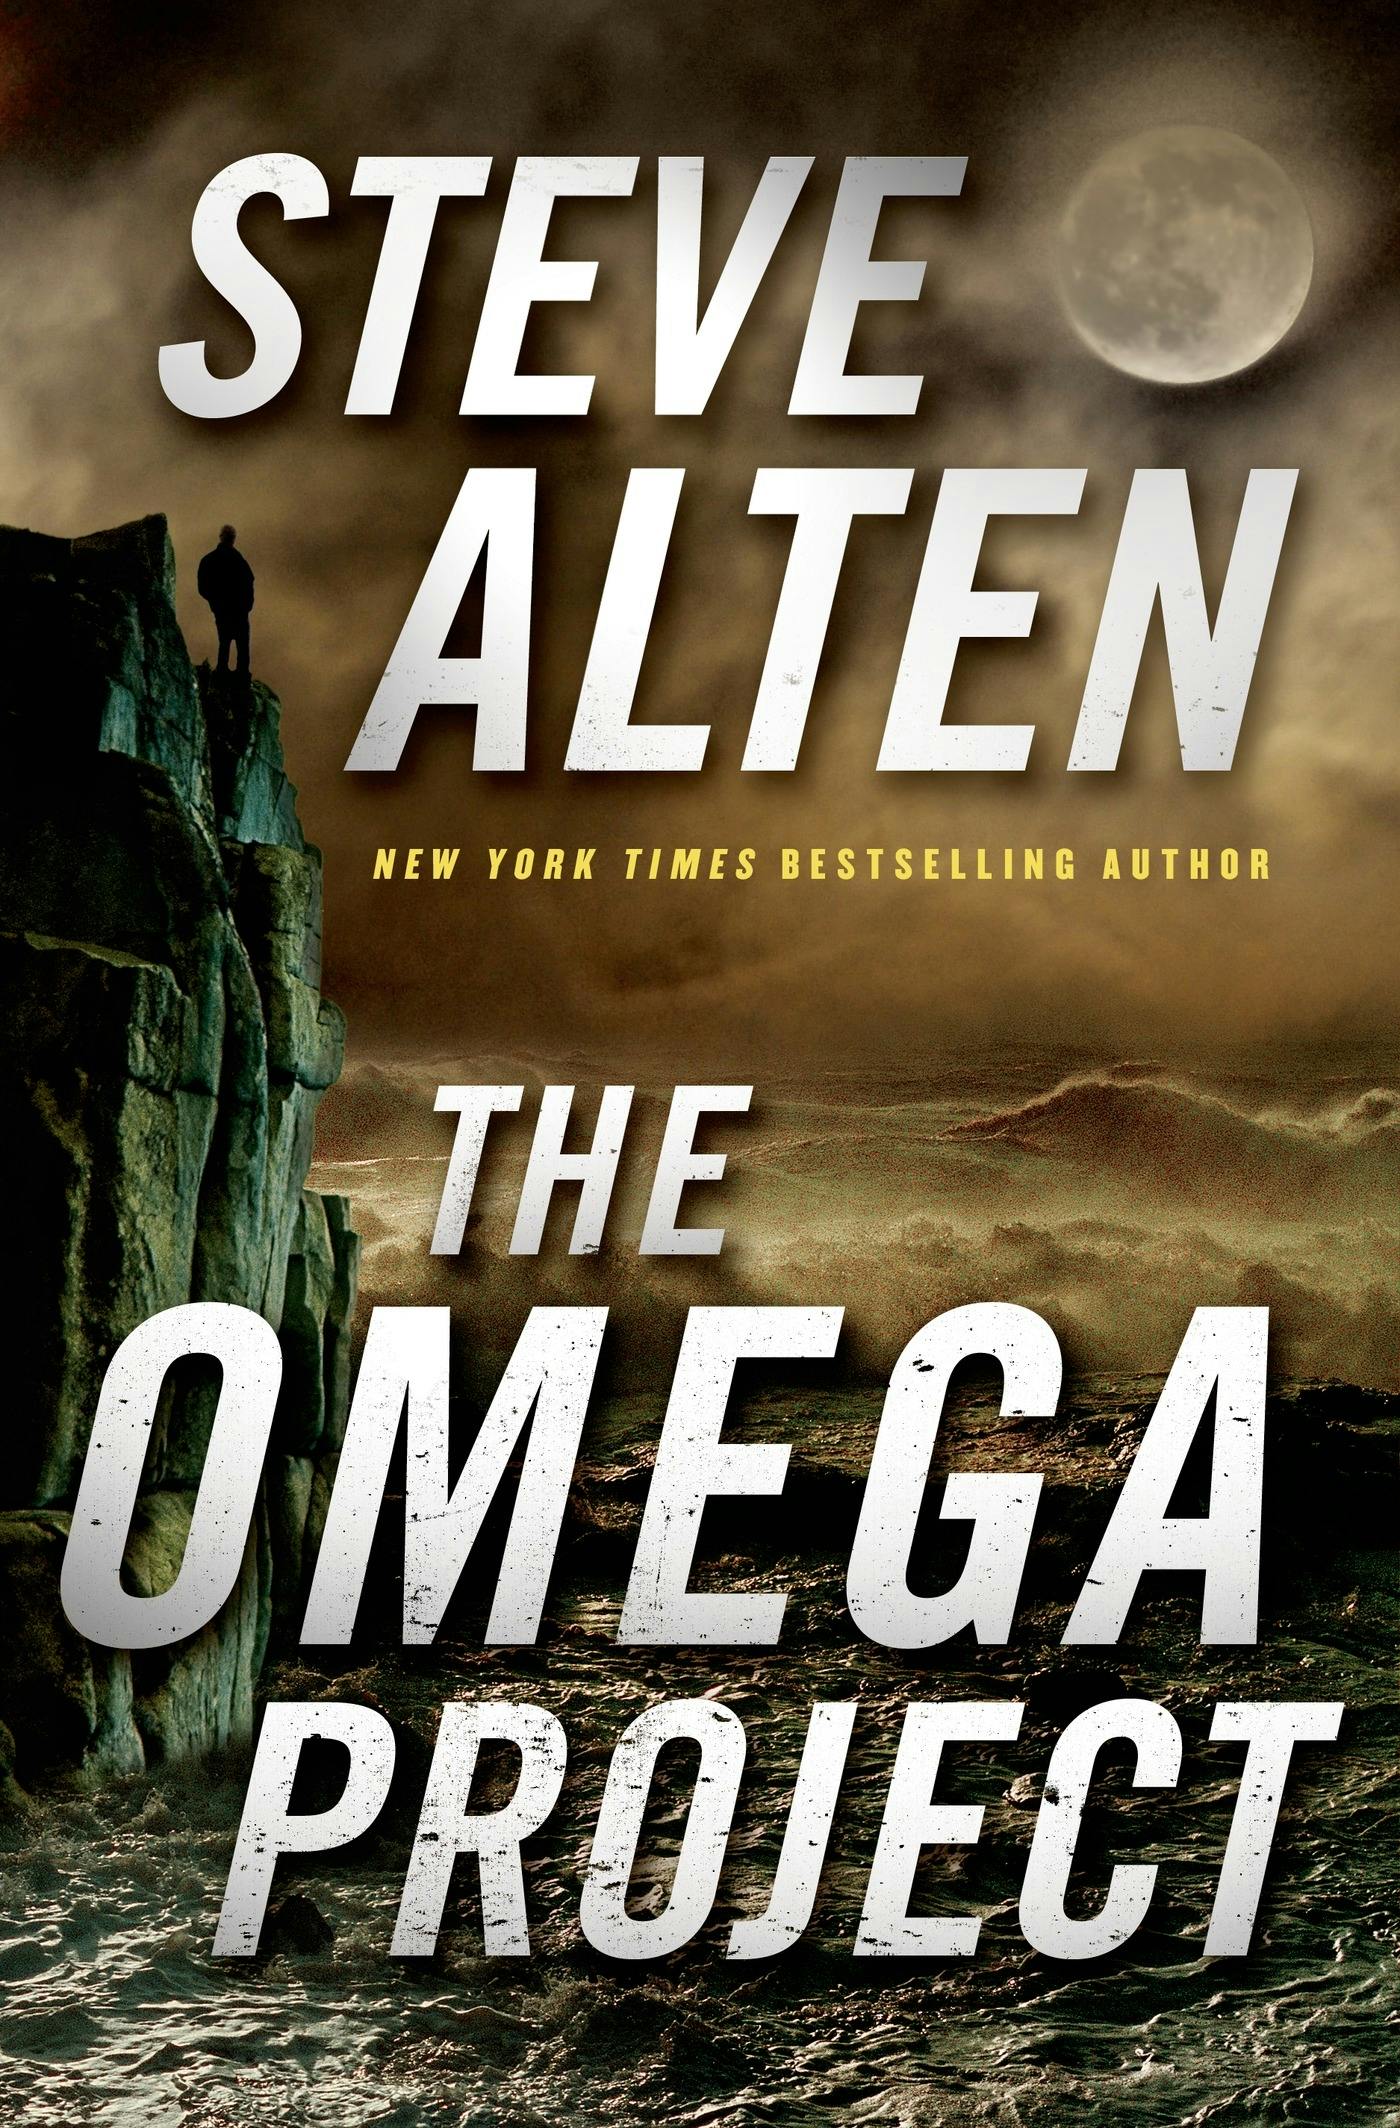 Cover for the book titled as: The Omega Project